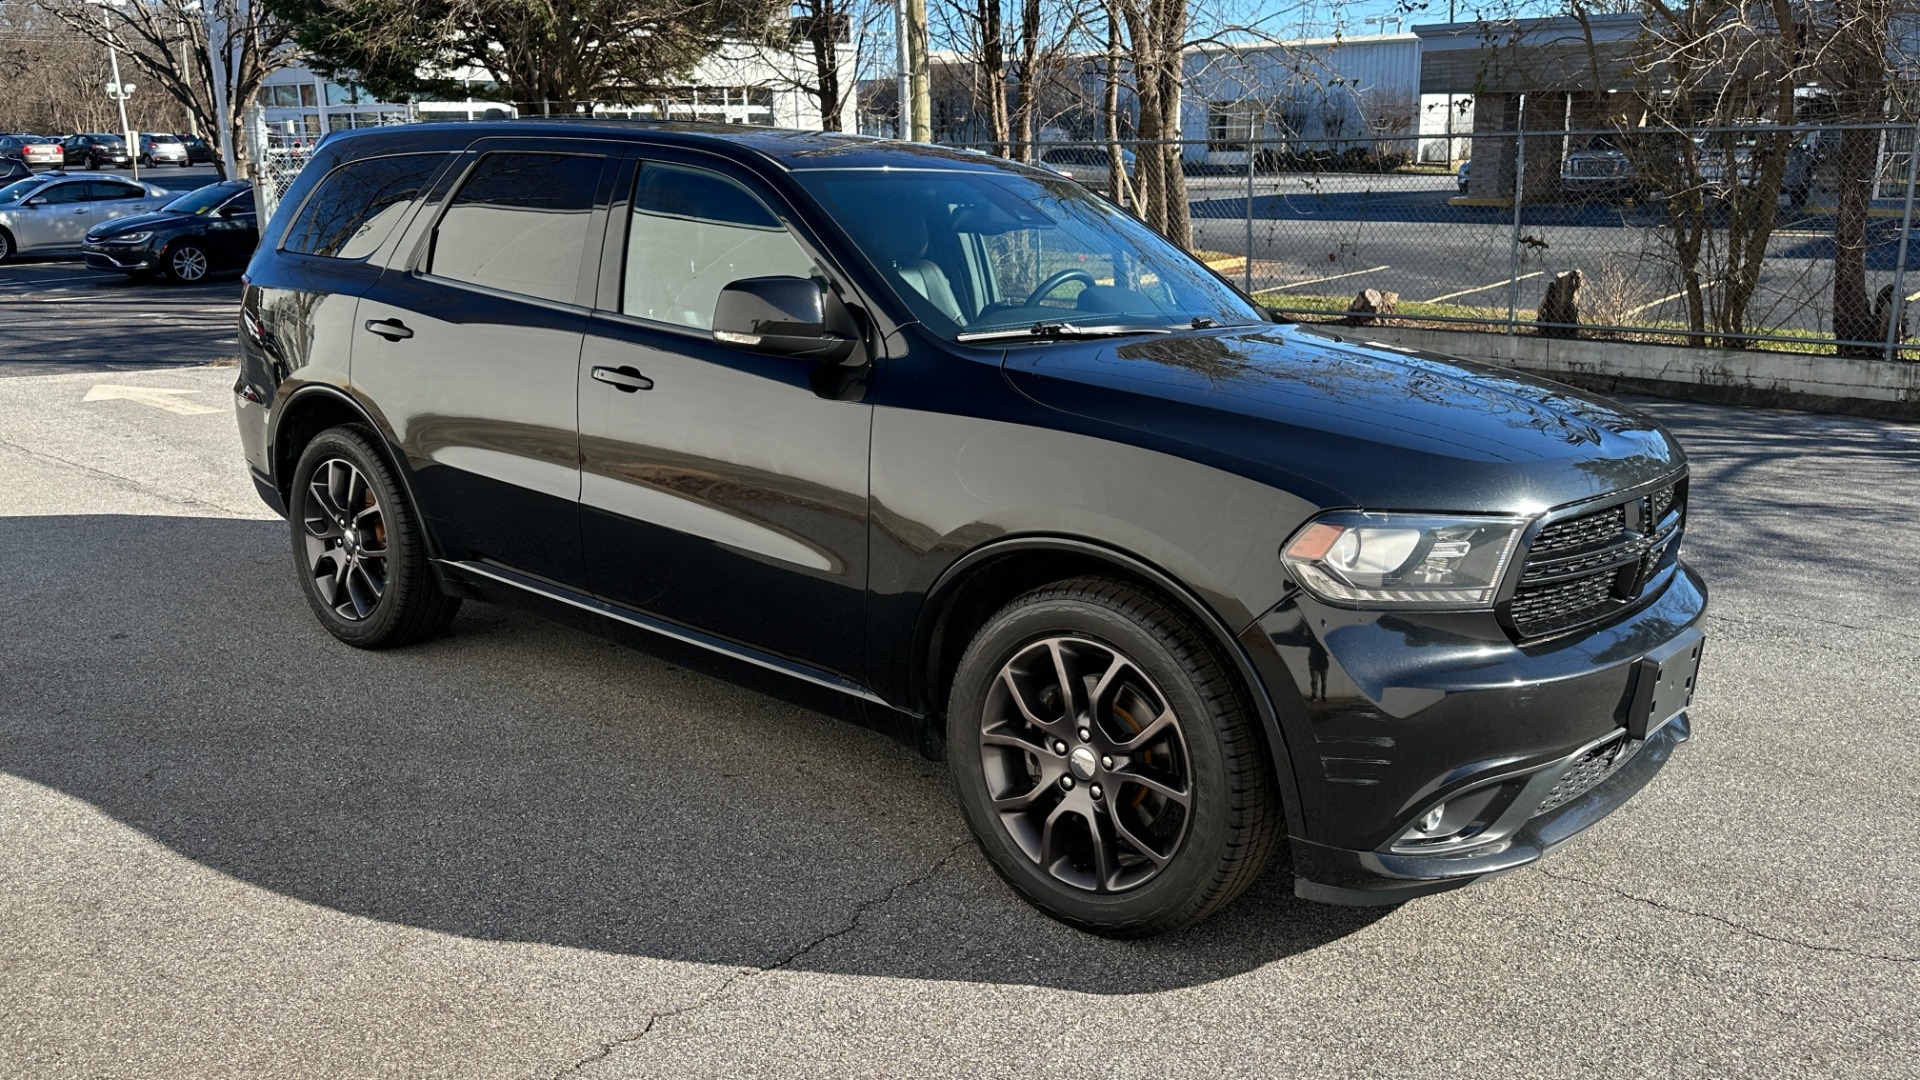 Used 2015 Dodge Durango R/T / HEMI V8 / CAPTAINS CHAIRS / 3 ROW SEATING / TECH PKG / NAPPA LEATHER  for sale Sold at Formula Imports in Charlotte NC 28227 6